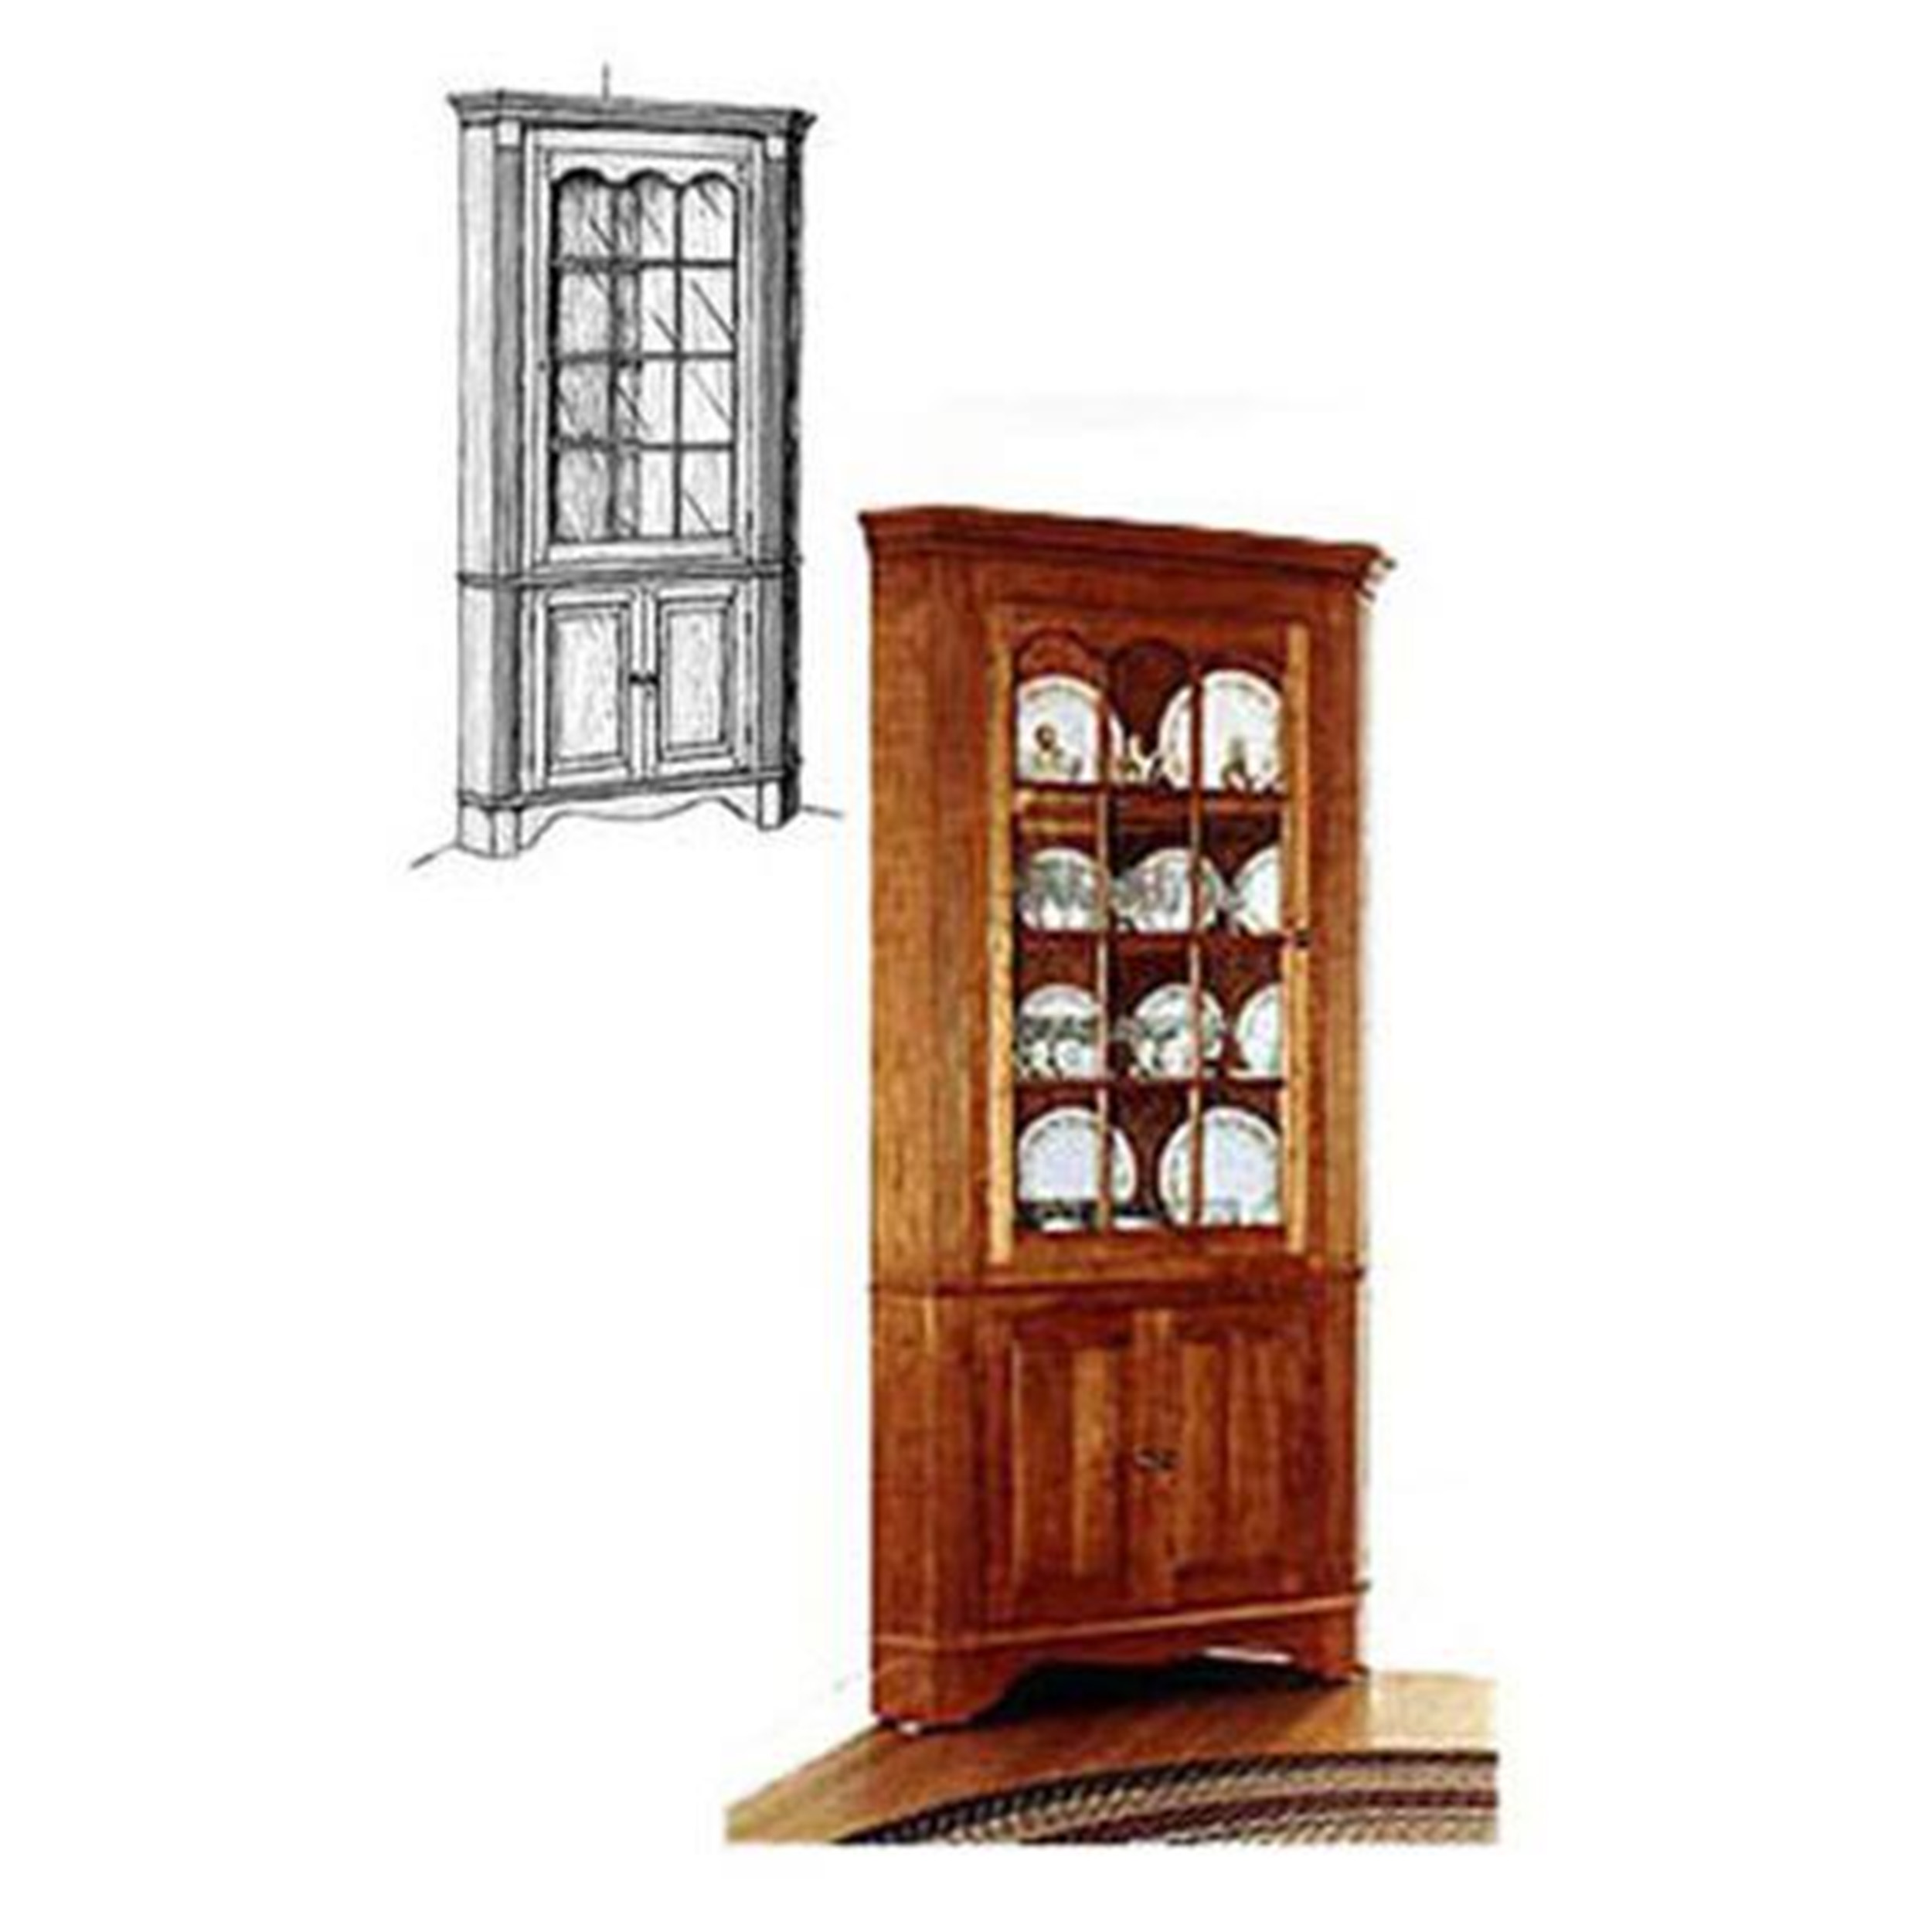 Woodworking Project Paper Plan To Build Colonial Corner Cabinet